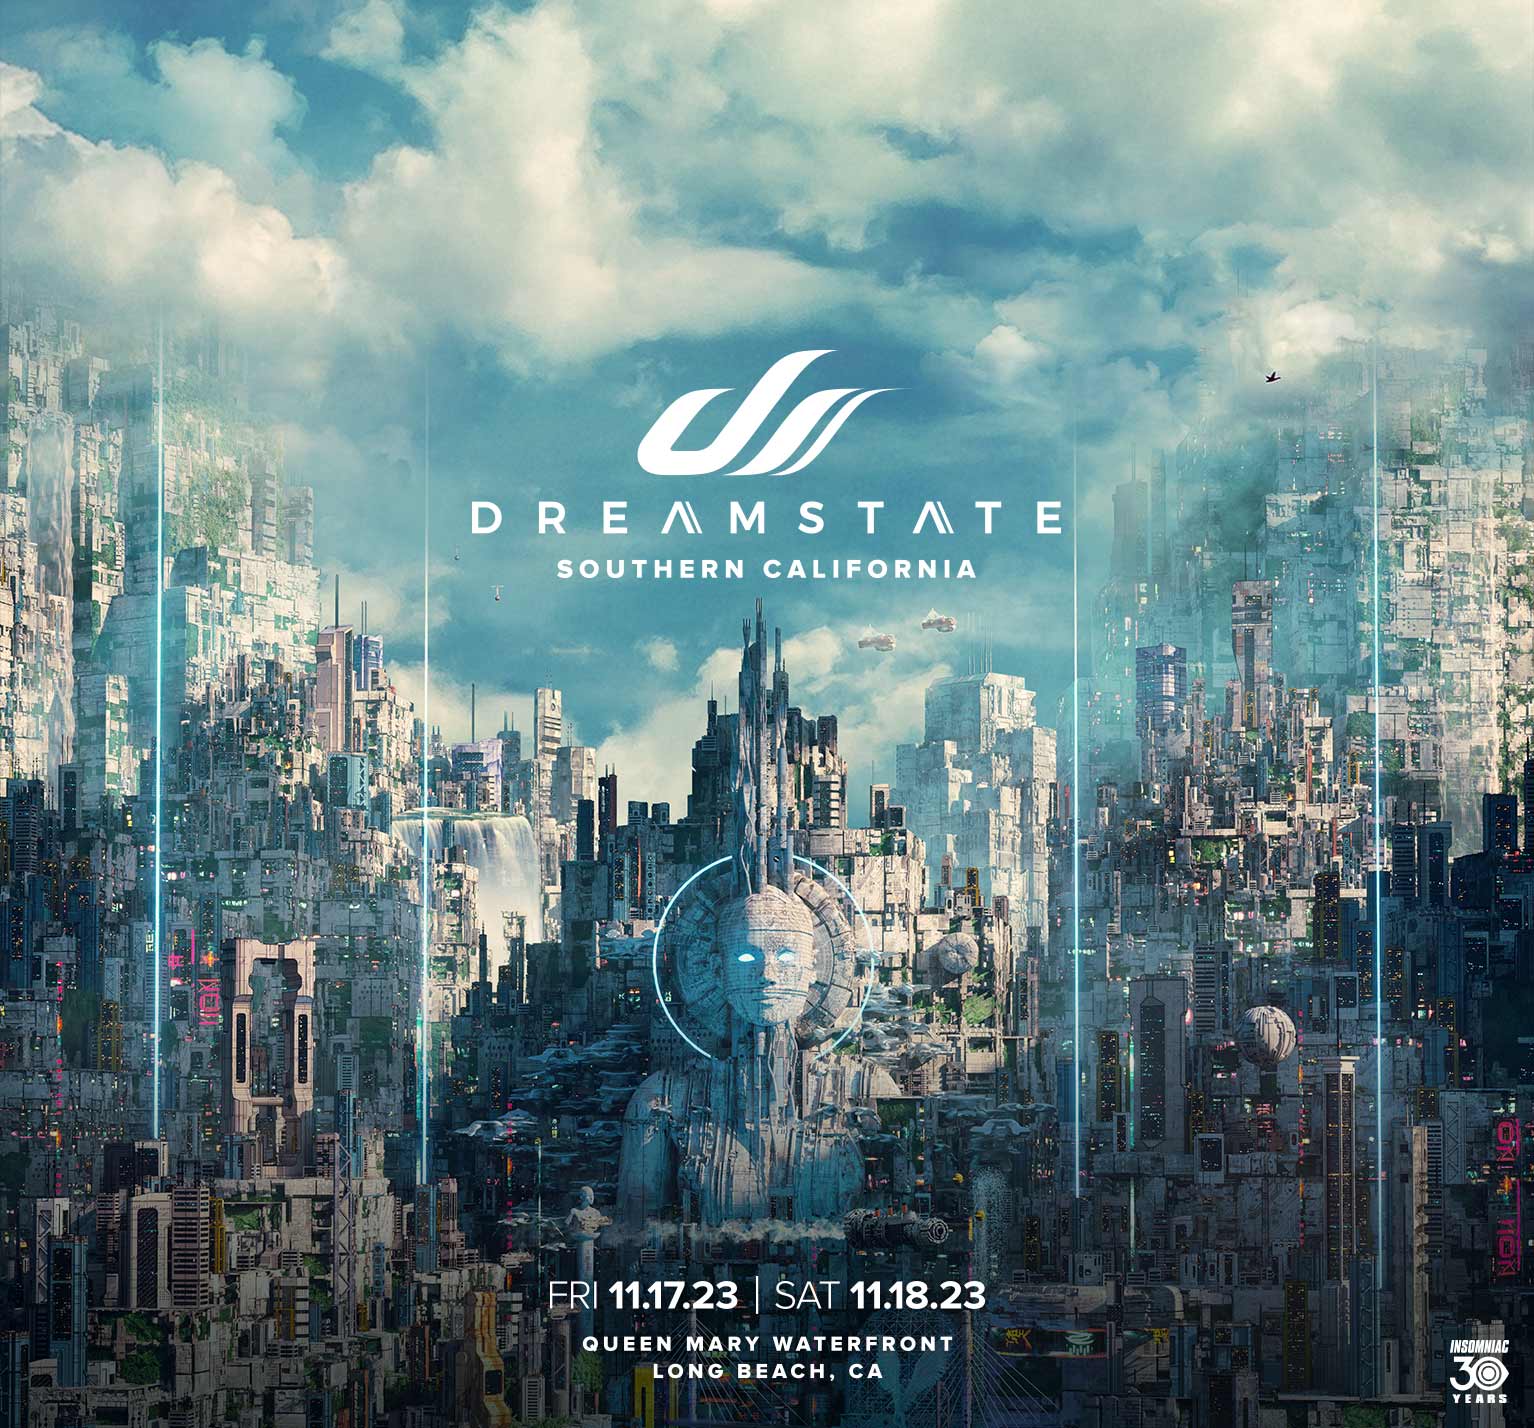 Dreamstate SoCal Bottle Service & VIP Table Reservations - Los Angeles -  Discotech - The #1 Nightlife App